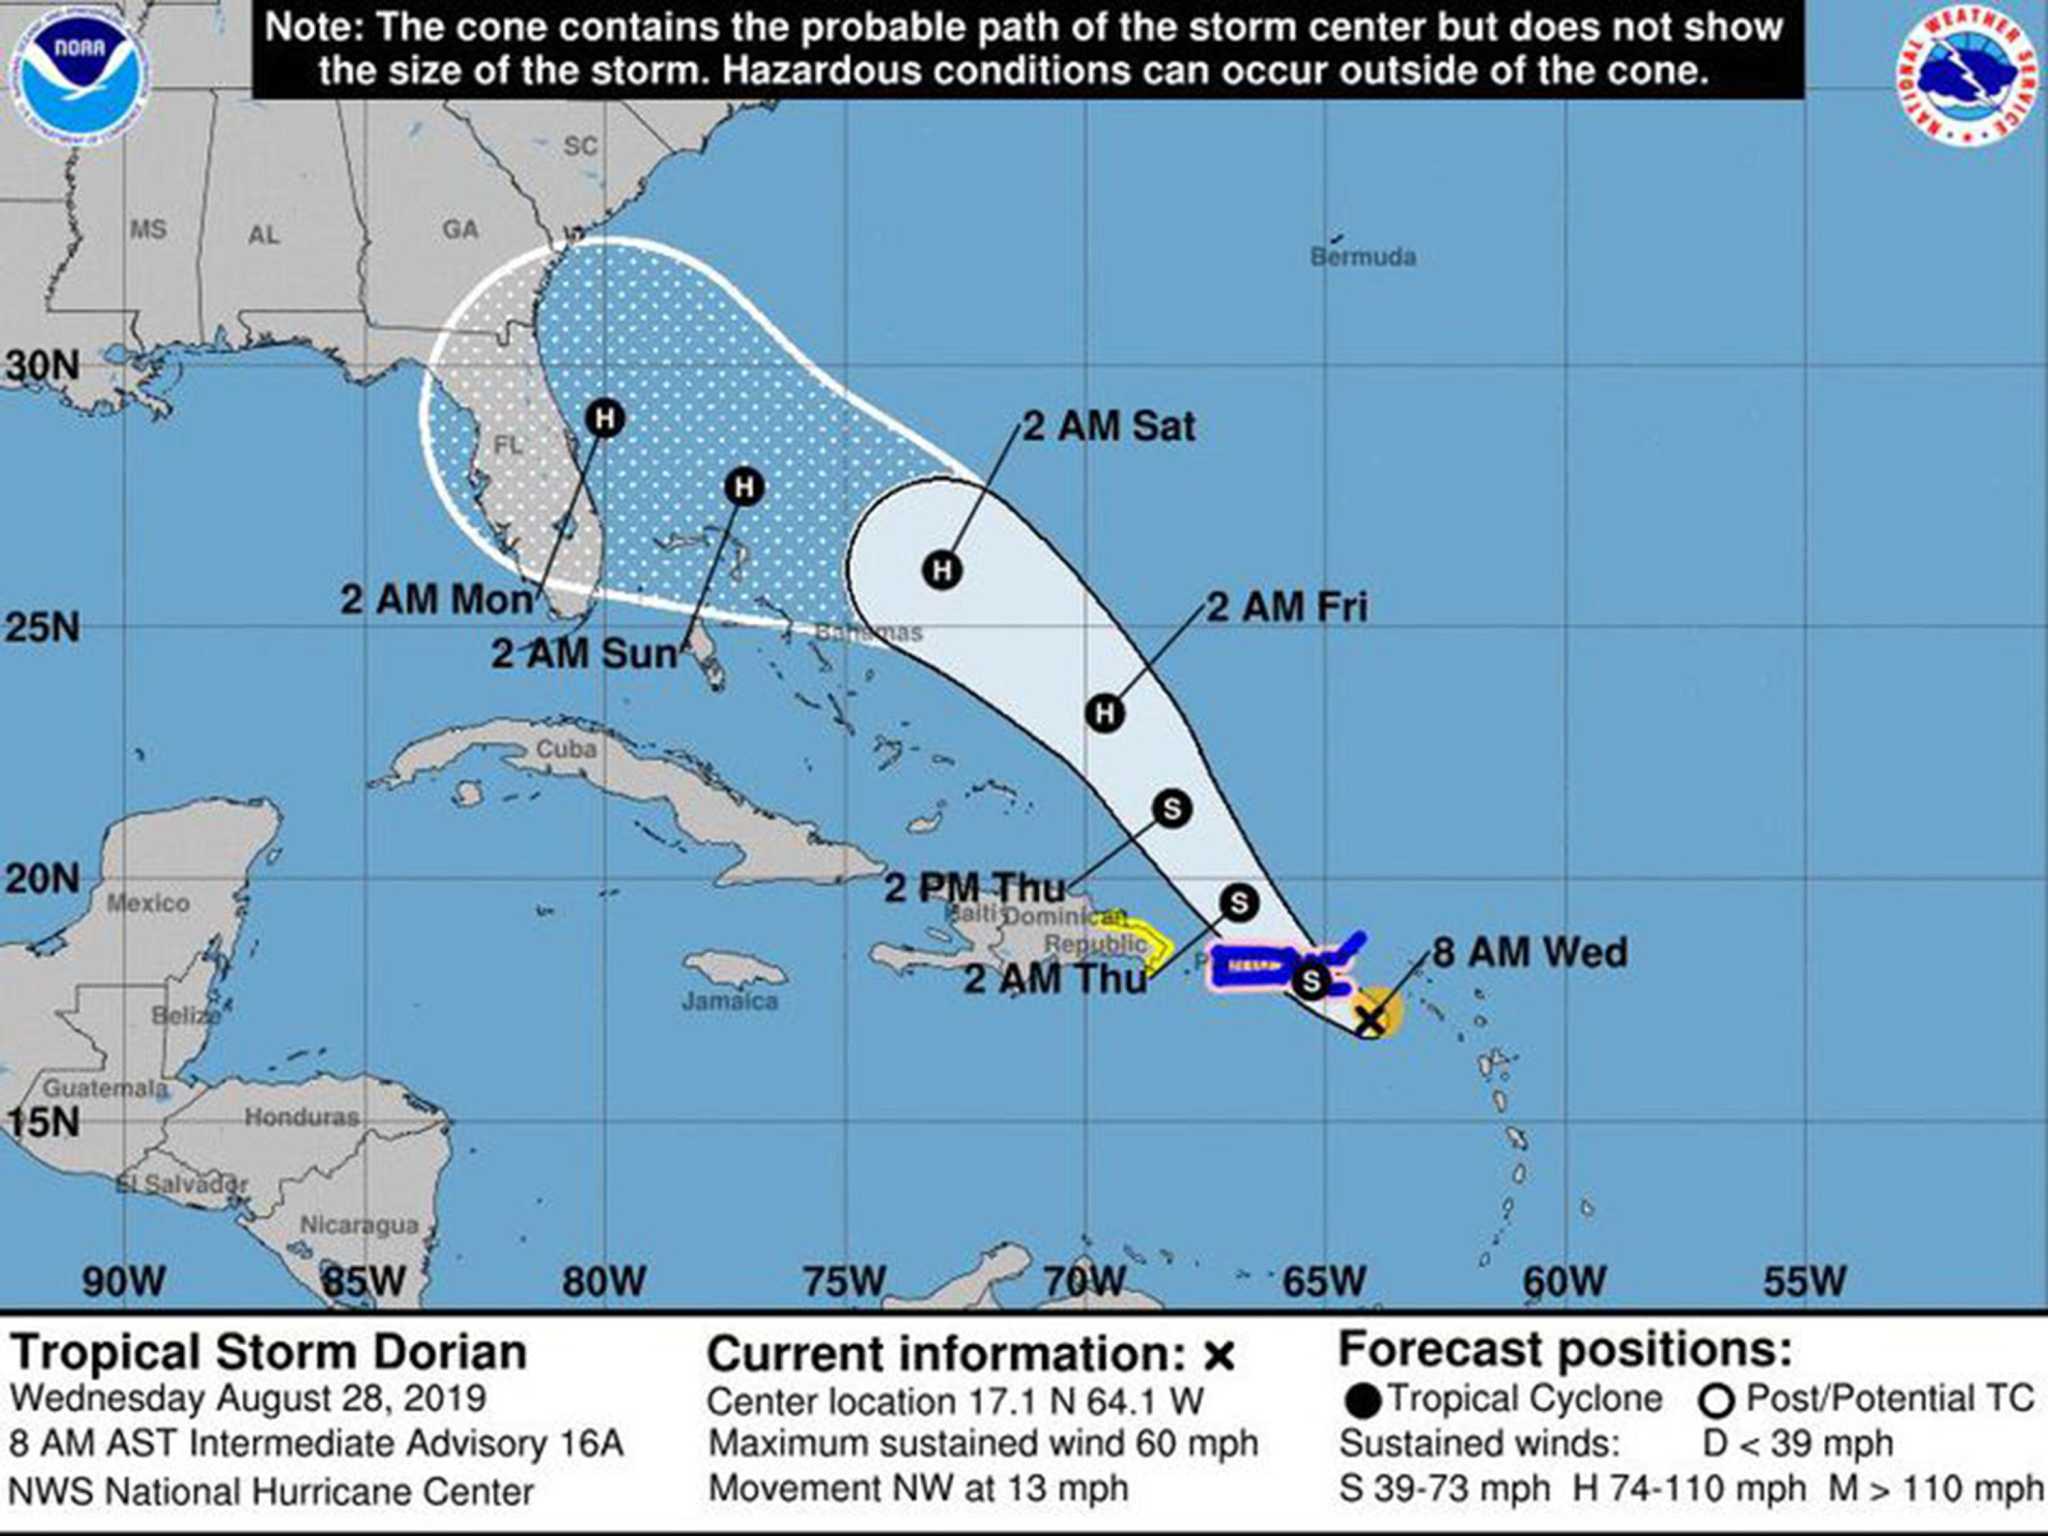 Track Dorian's path with this live hurricane tracker